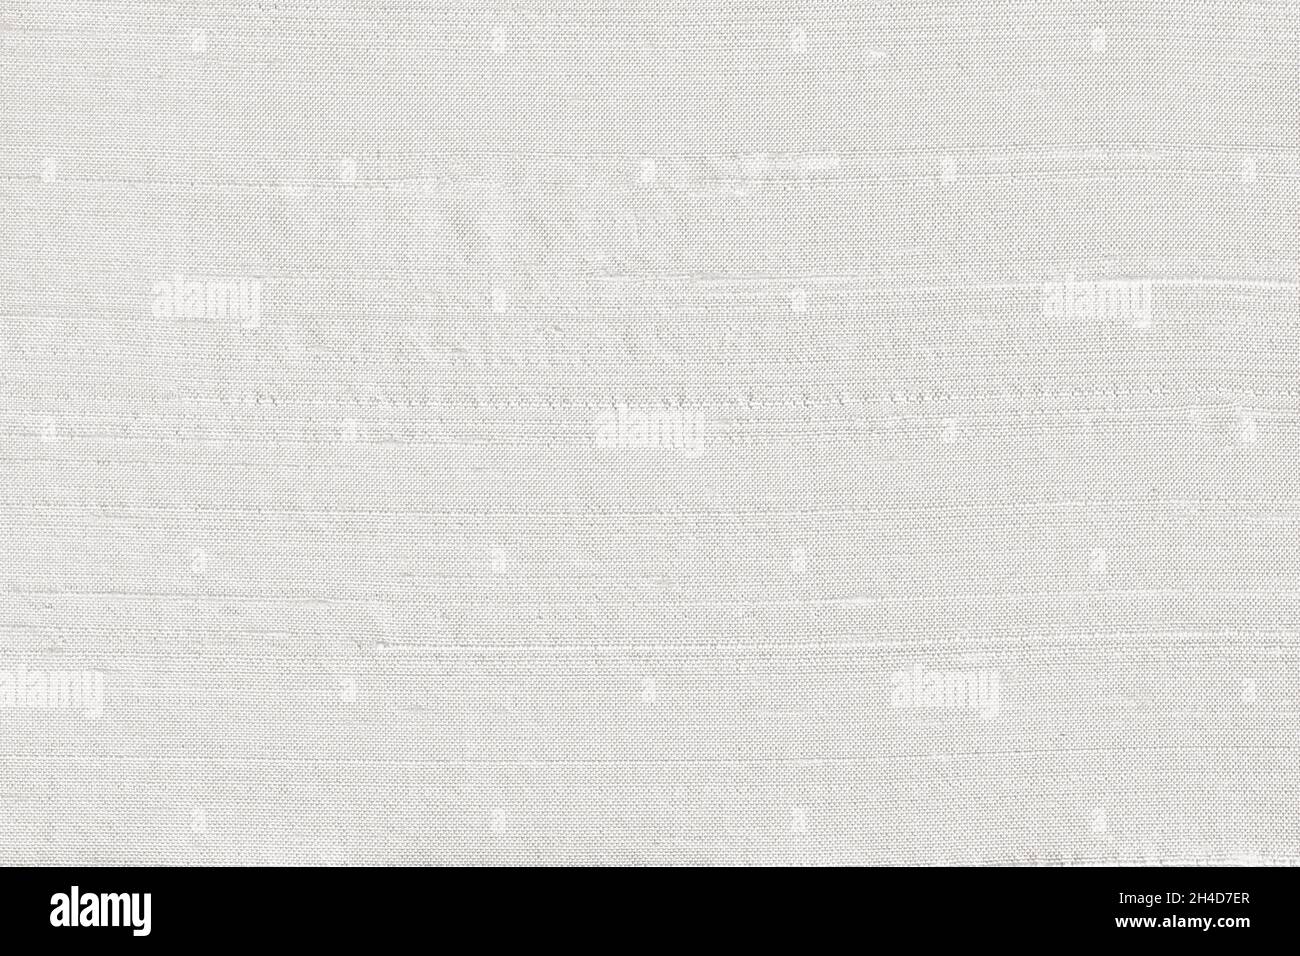 Off white or offwhite linen texture. Neutral, retro background, template or fabric pattern Stock Photo